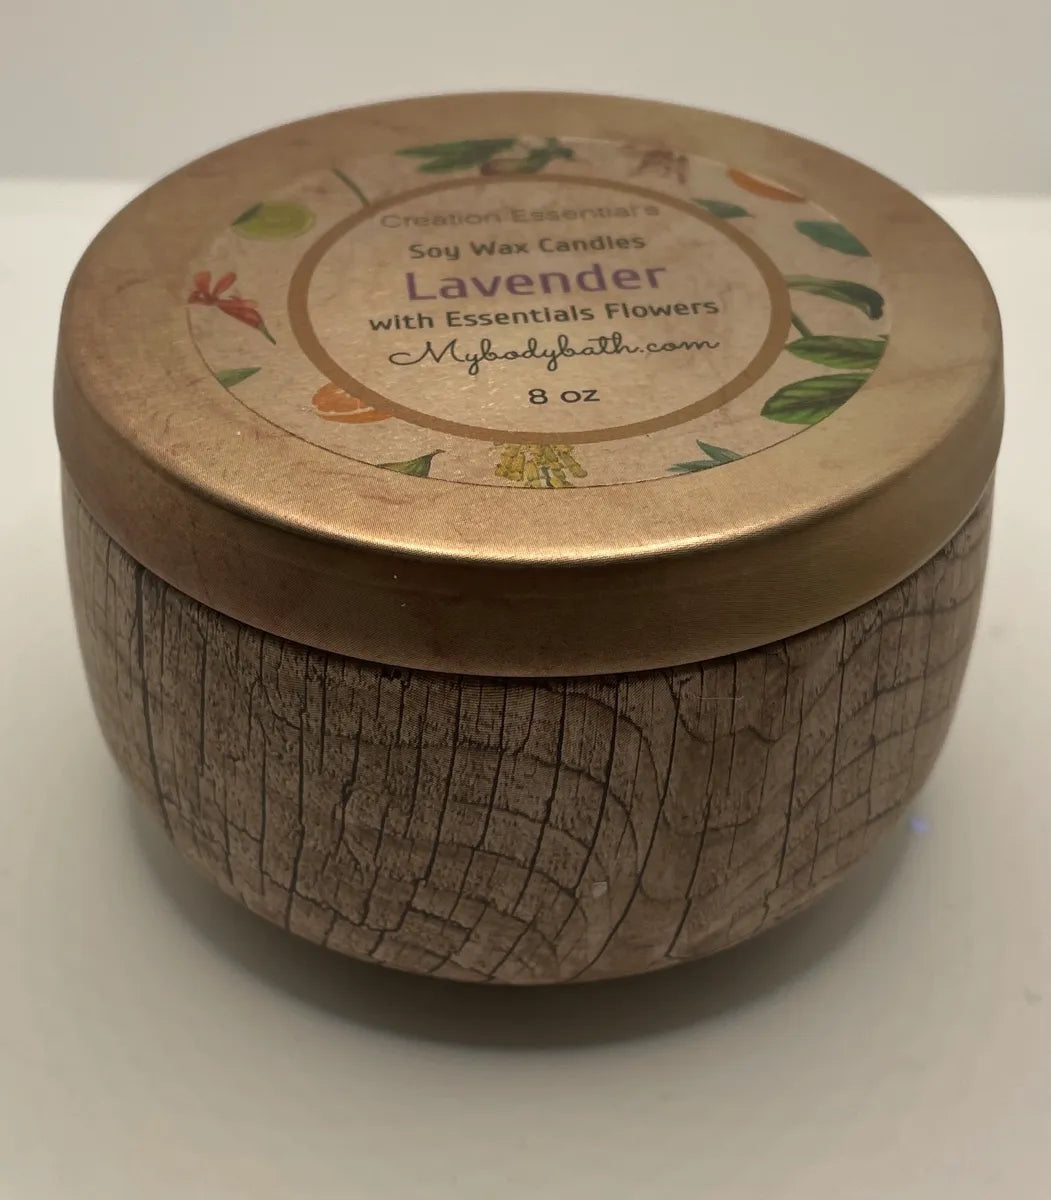 Wood Wick Soy Wax Luxury Candle Lavender